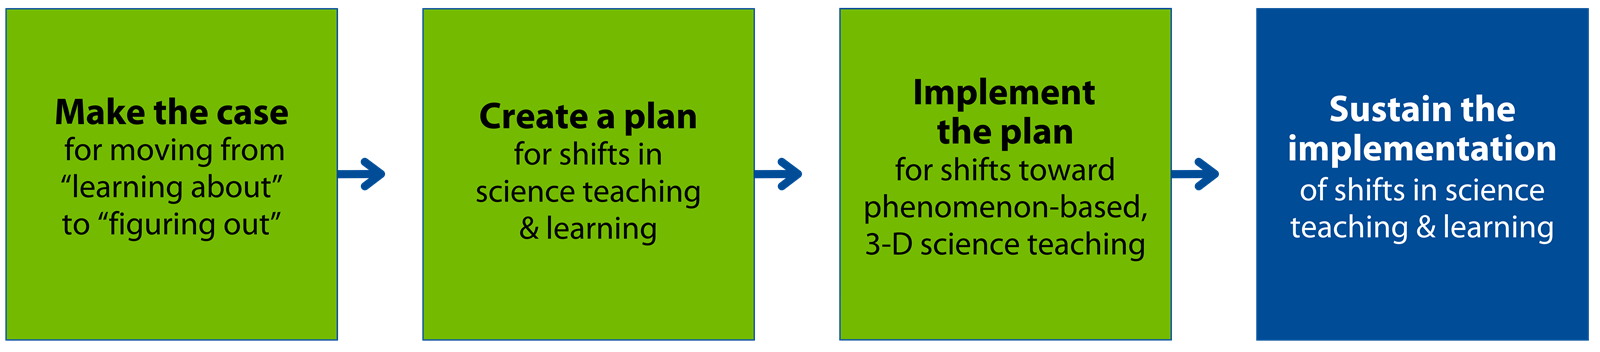 Sustain the implementation of shifts in science teaching and learning